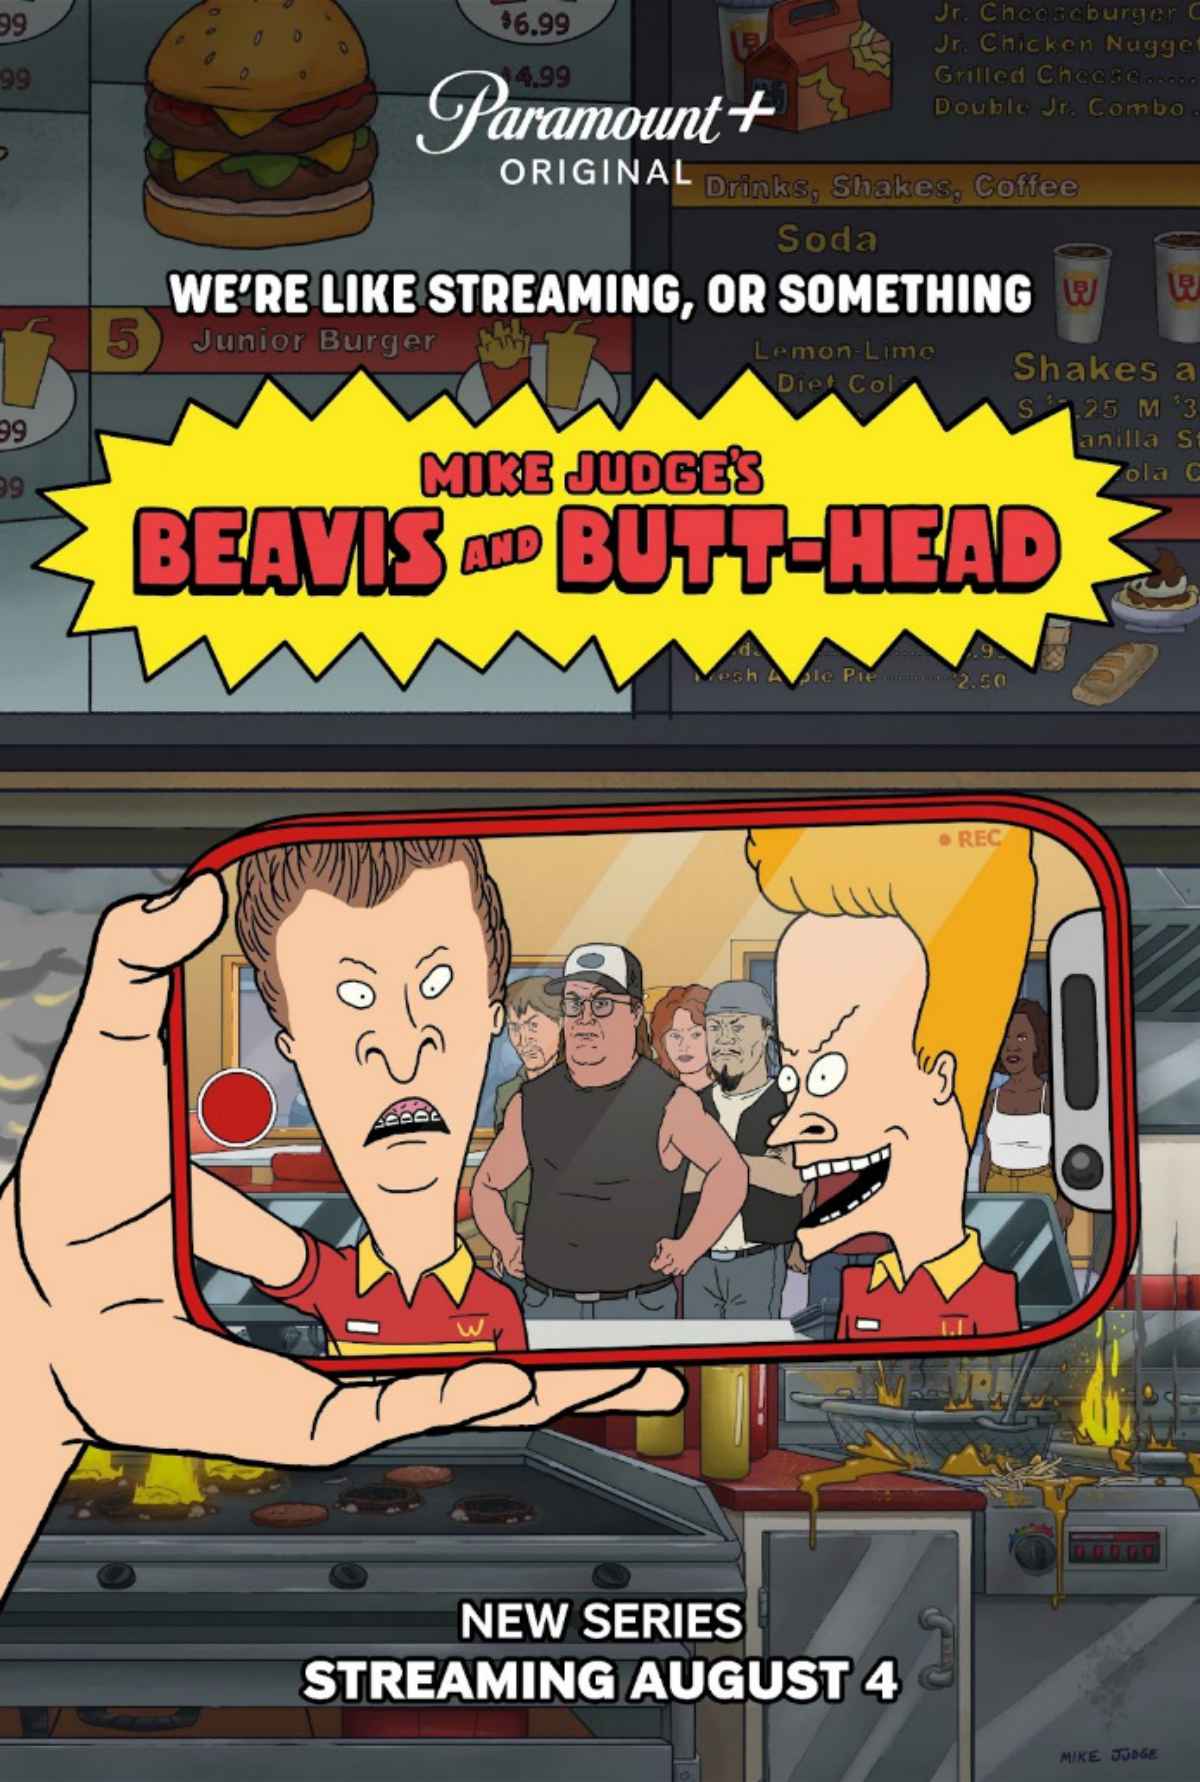 Mike Judge Beavis and Butt-Head Premiere Date and Trailer